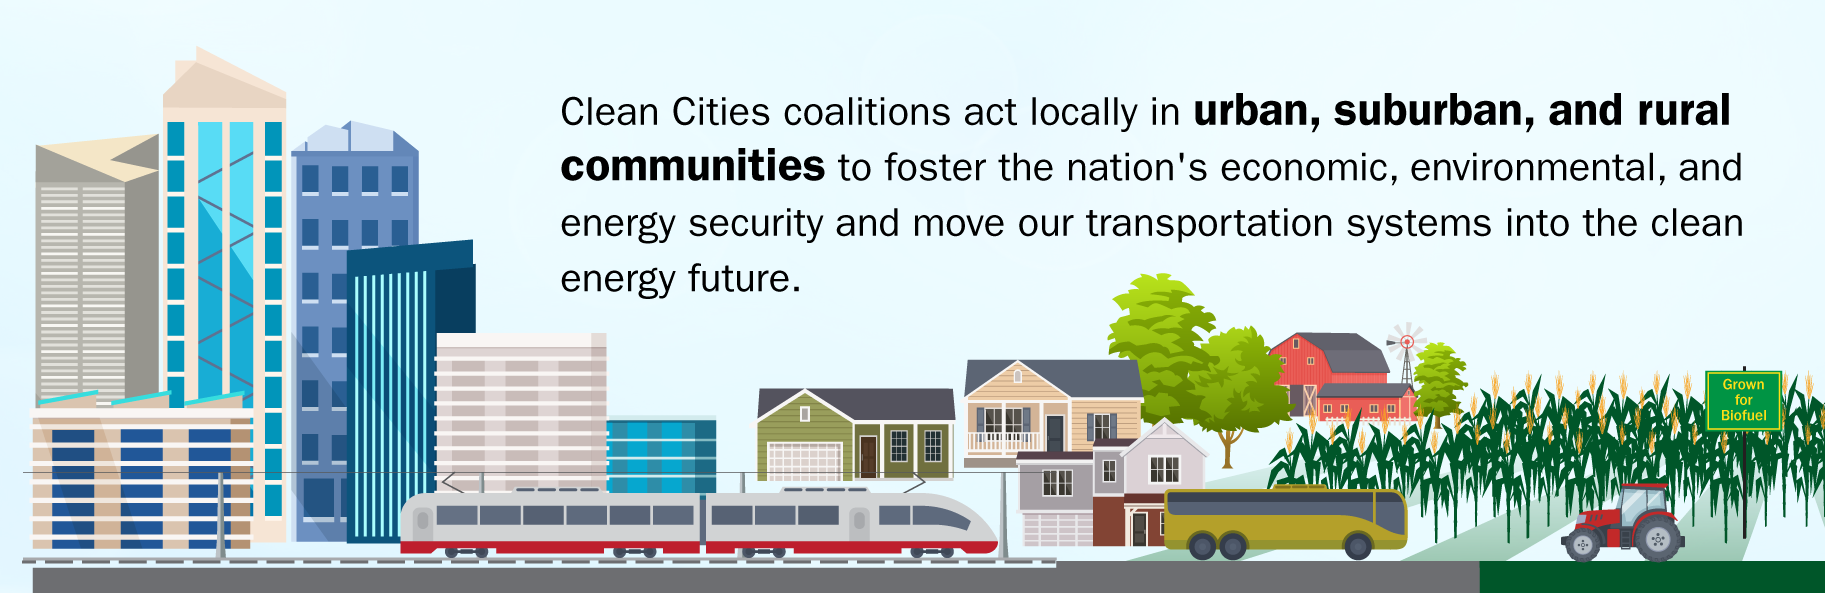 Clean Cities coalitions act locally in urban, suburban, and rural communities to foster the nation's economic, environmental, and energy security and move our transportation systems into the clean energy future.